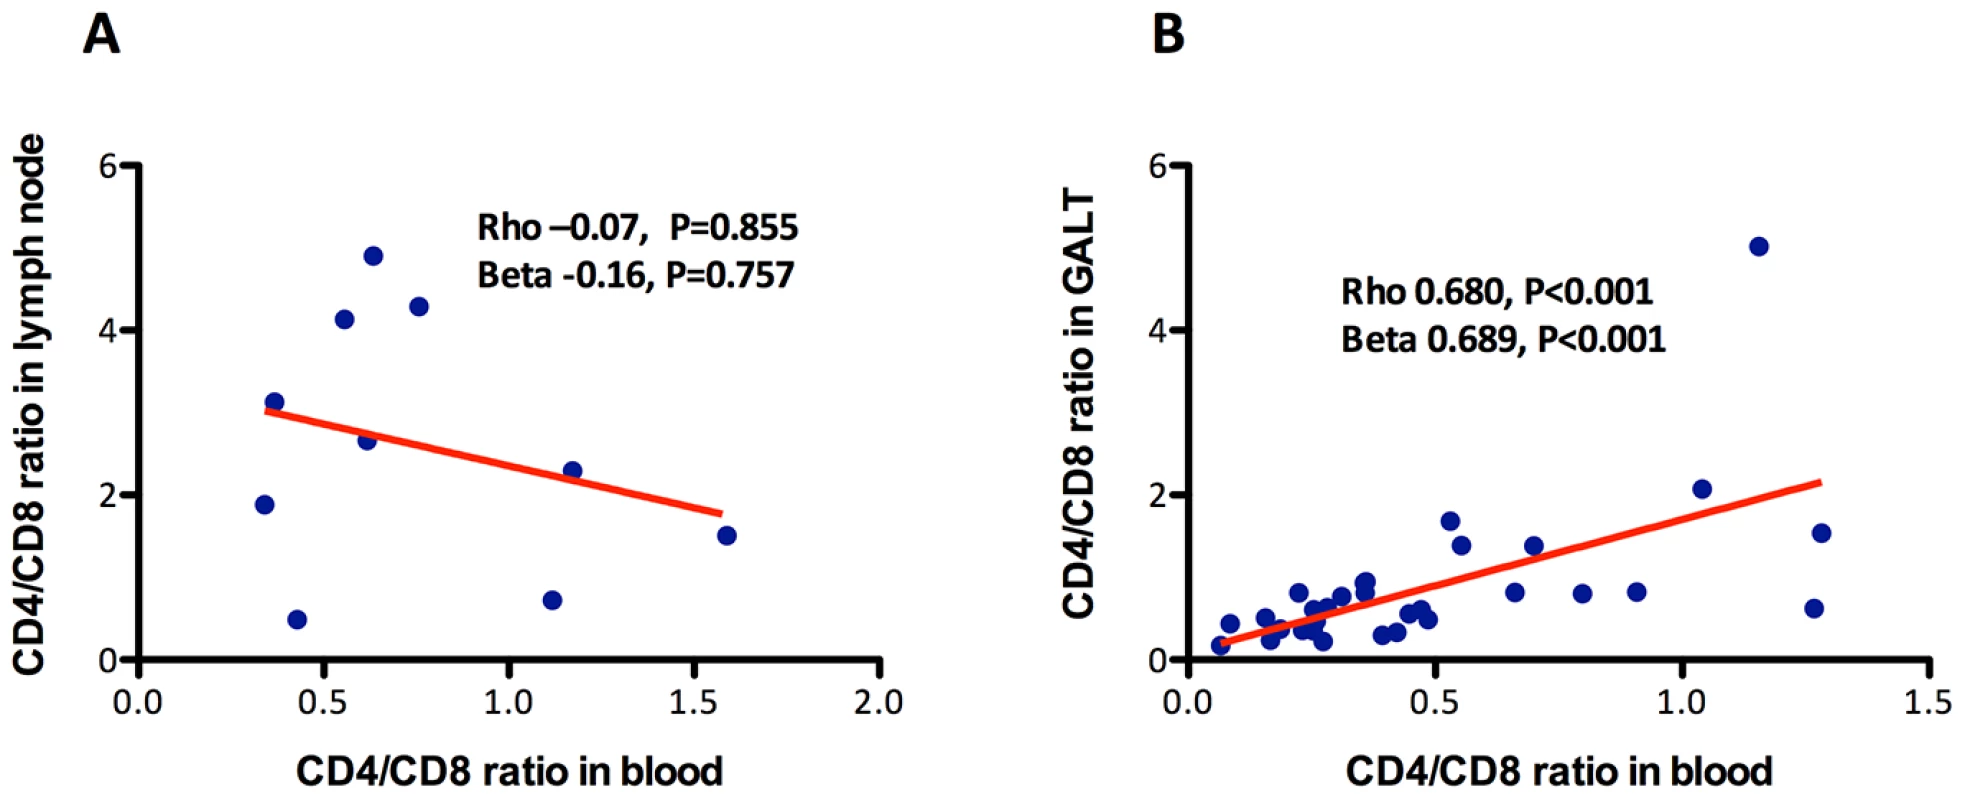 Association between the CD4/CD8 ratio in blood and in lymph nodes or in GALT.